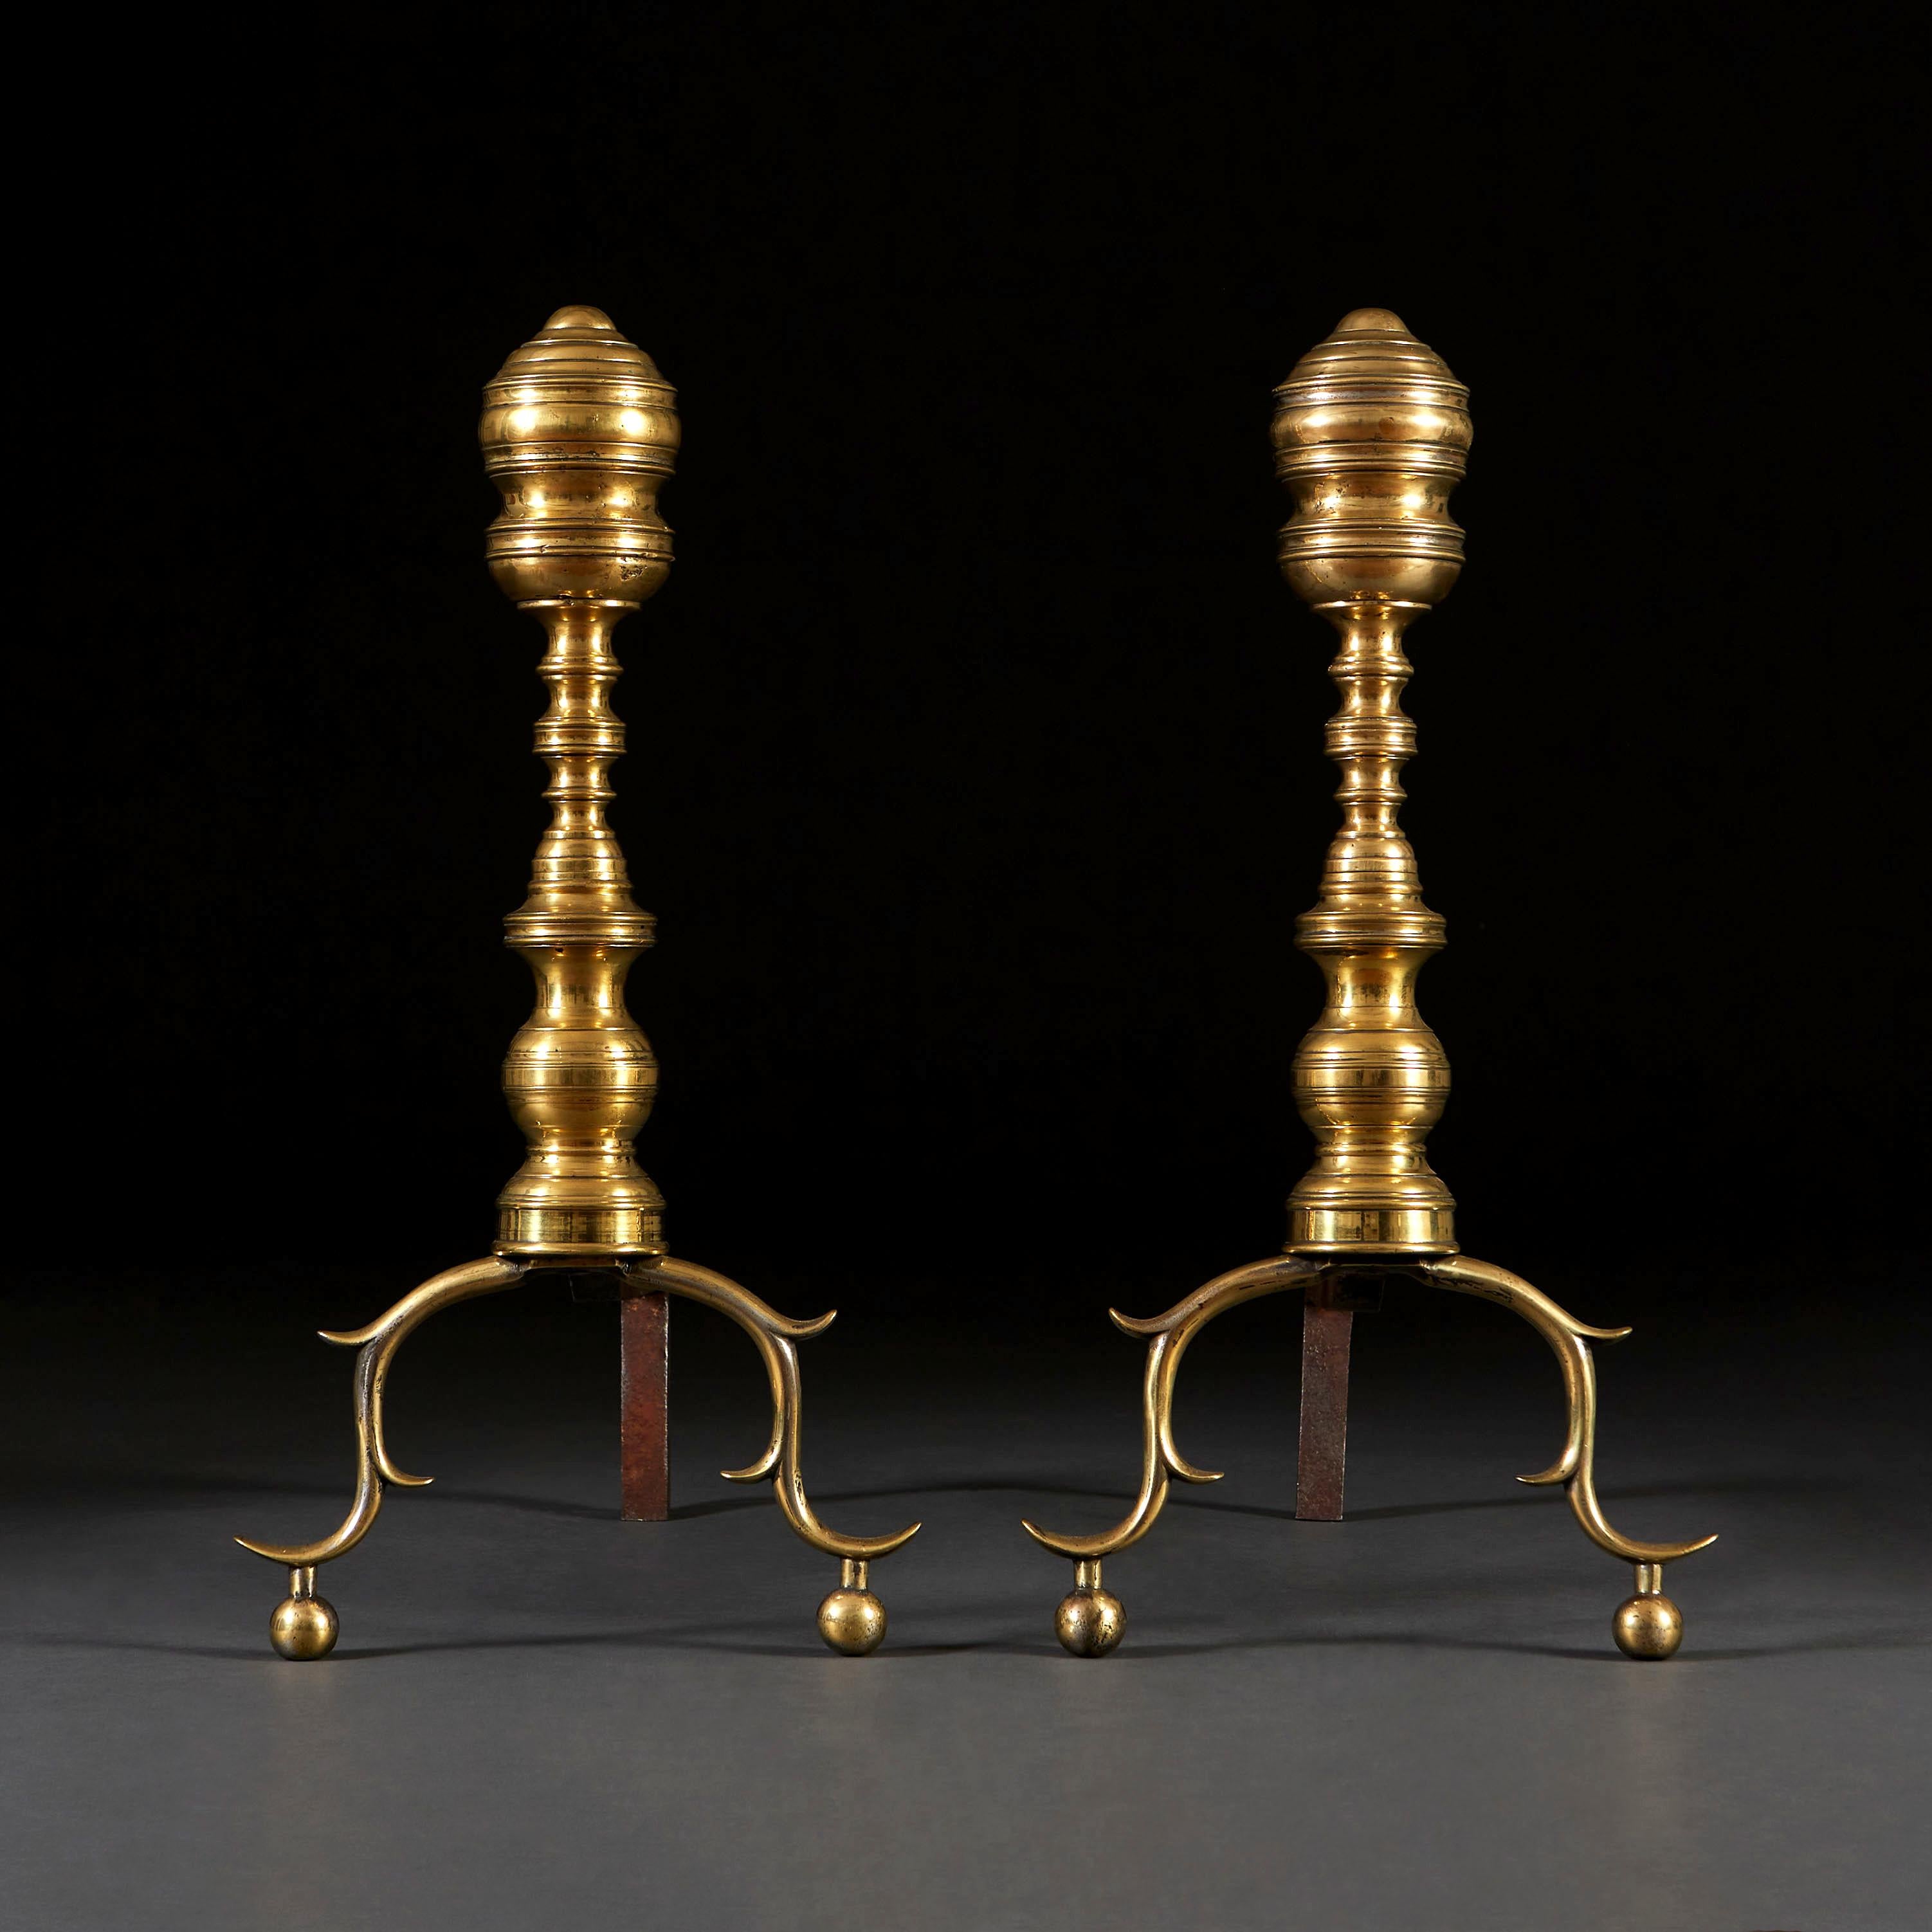 A pair of mid nineteenth century American brass and cast iron fire dogs, with turned uprights, and scrolled legs resting on ball feet.